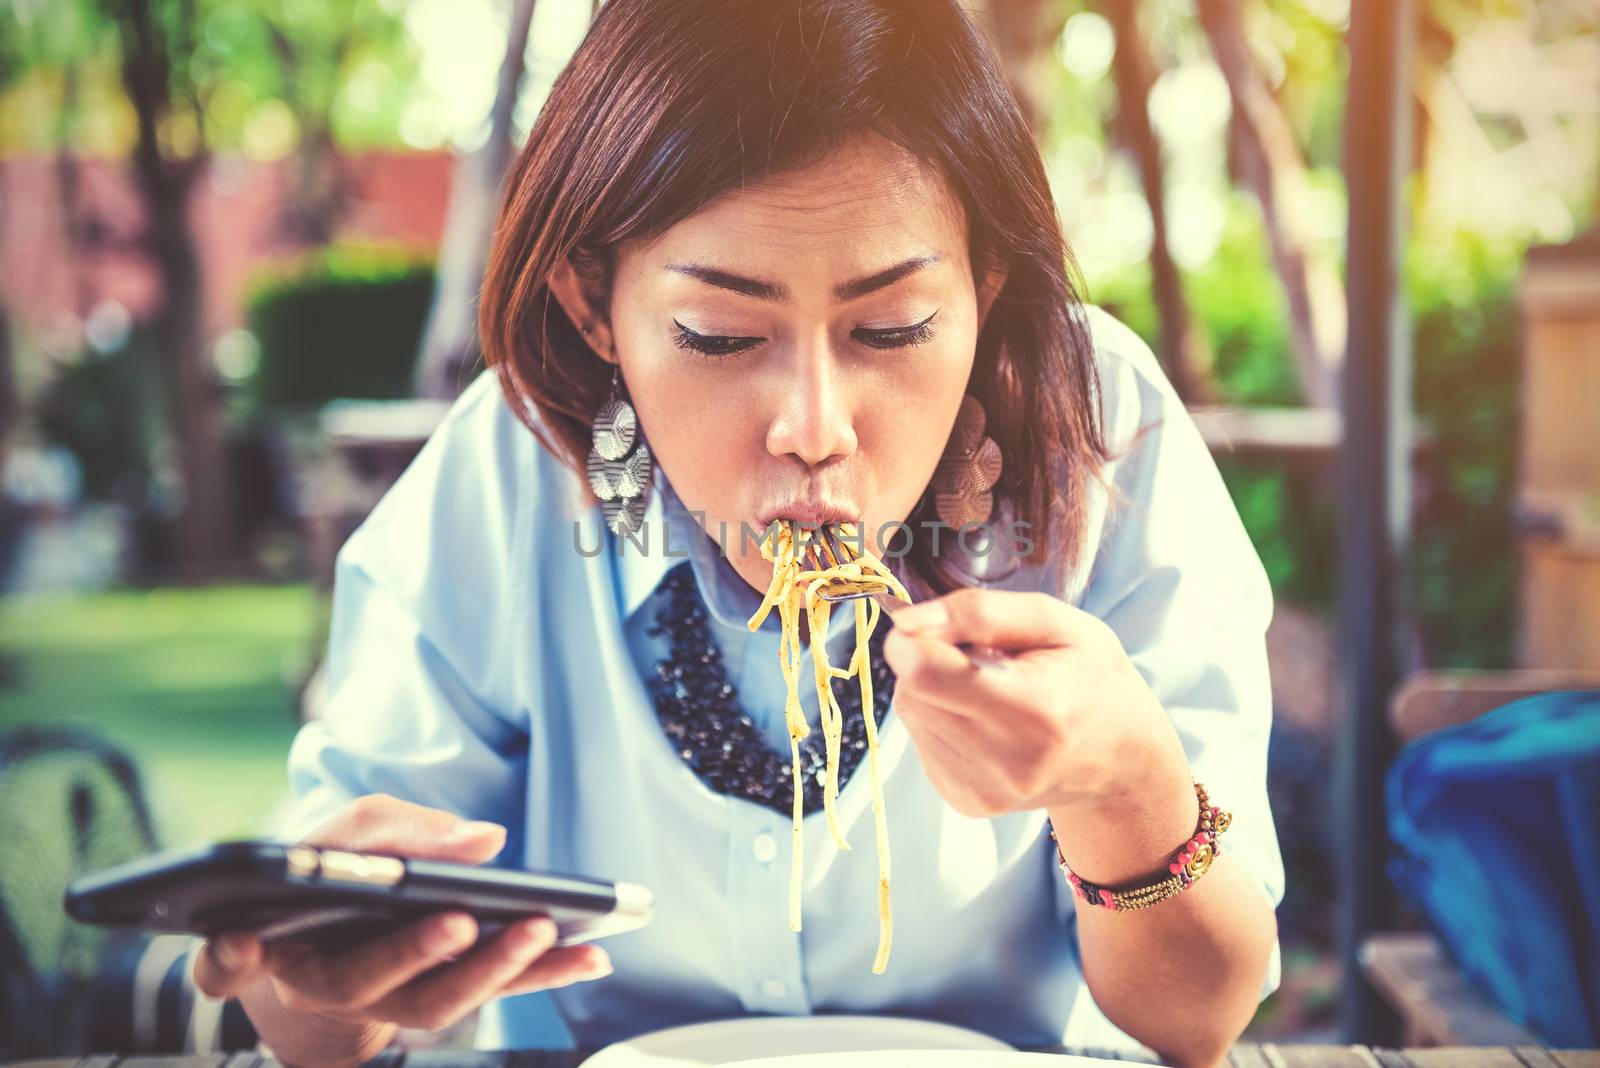 Asian women are happy when eating and playing mobile games,focus on the face.